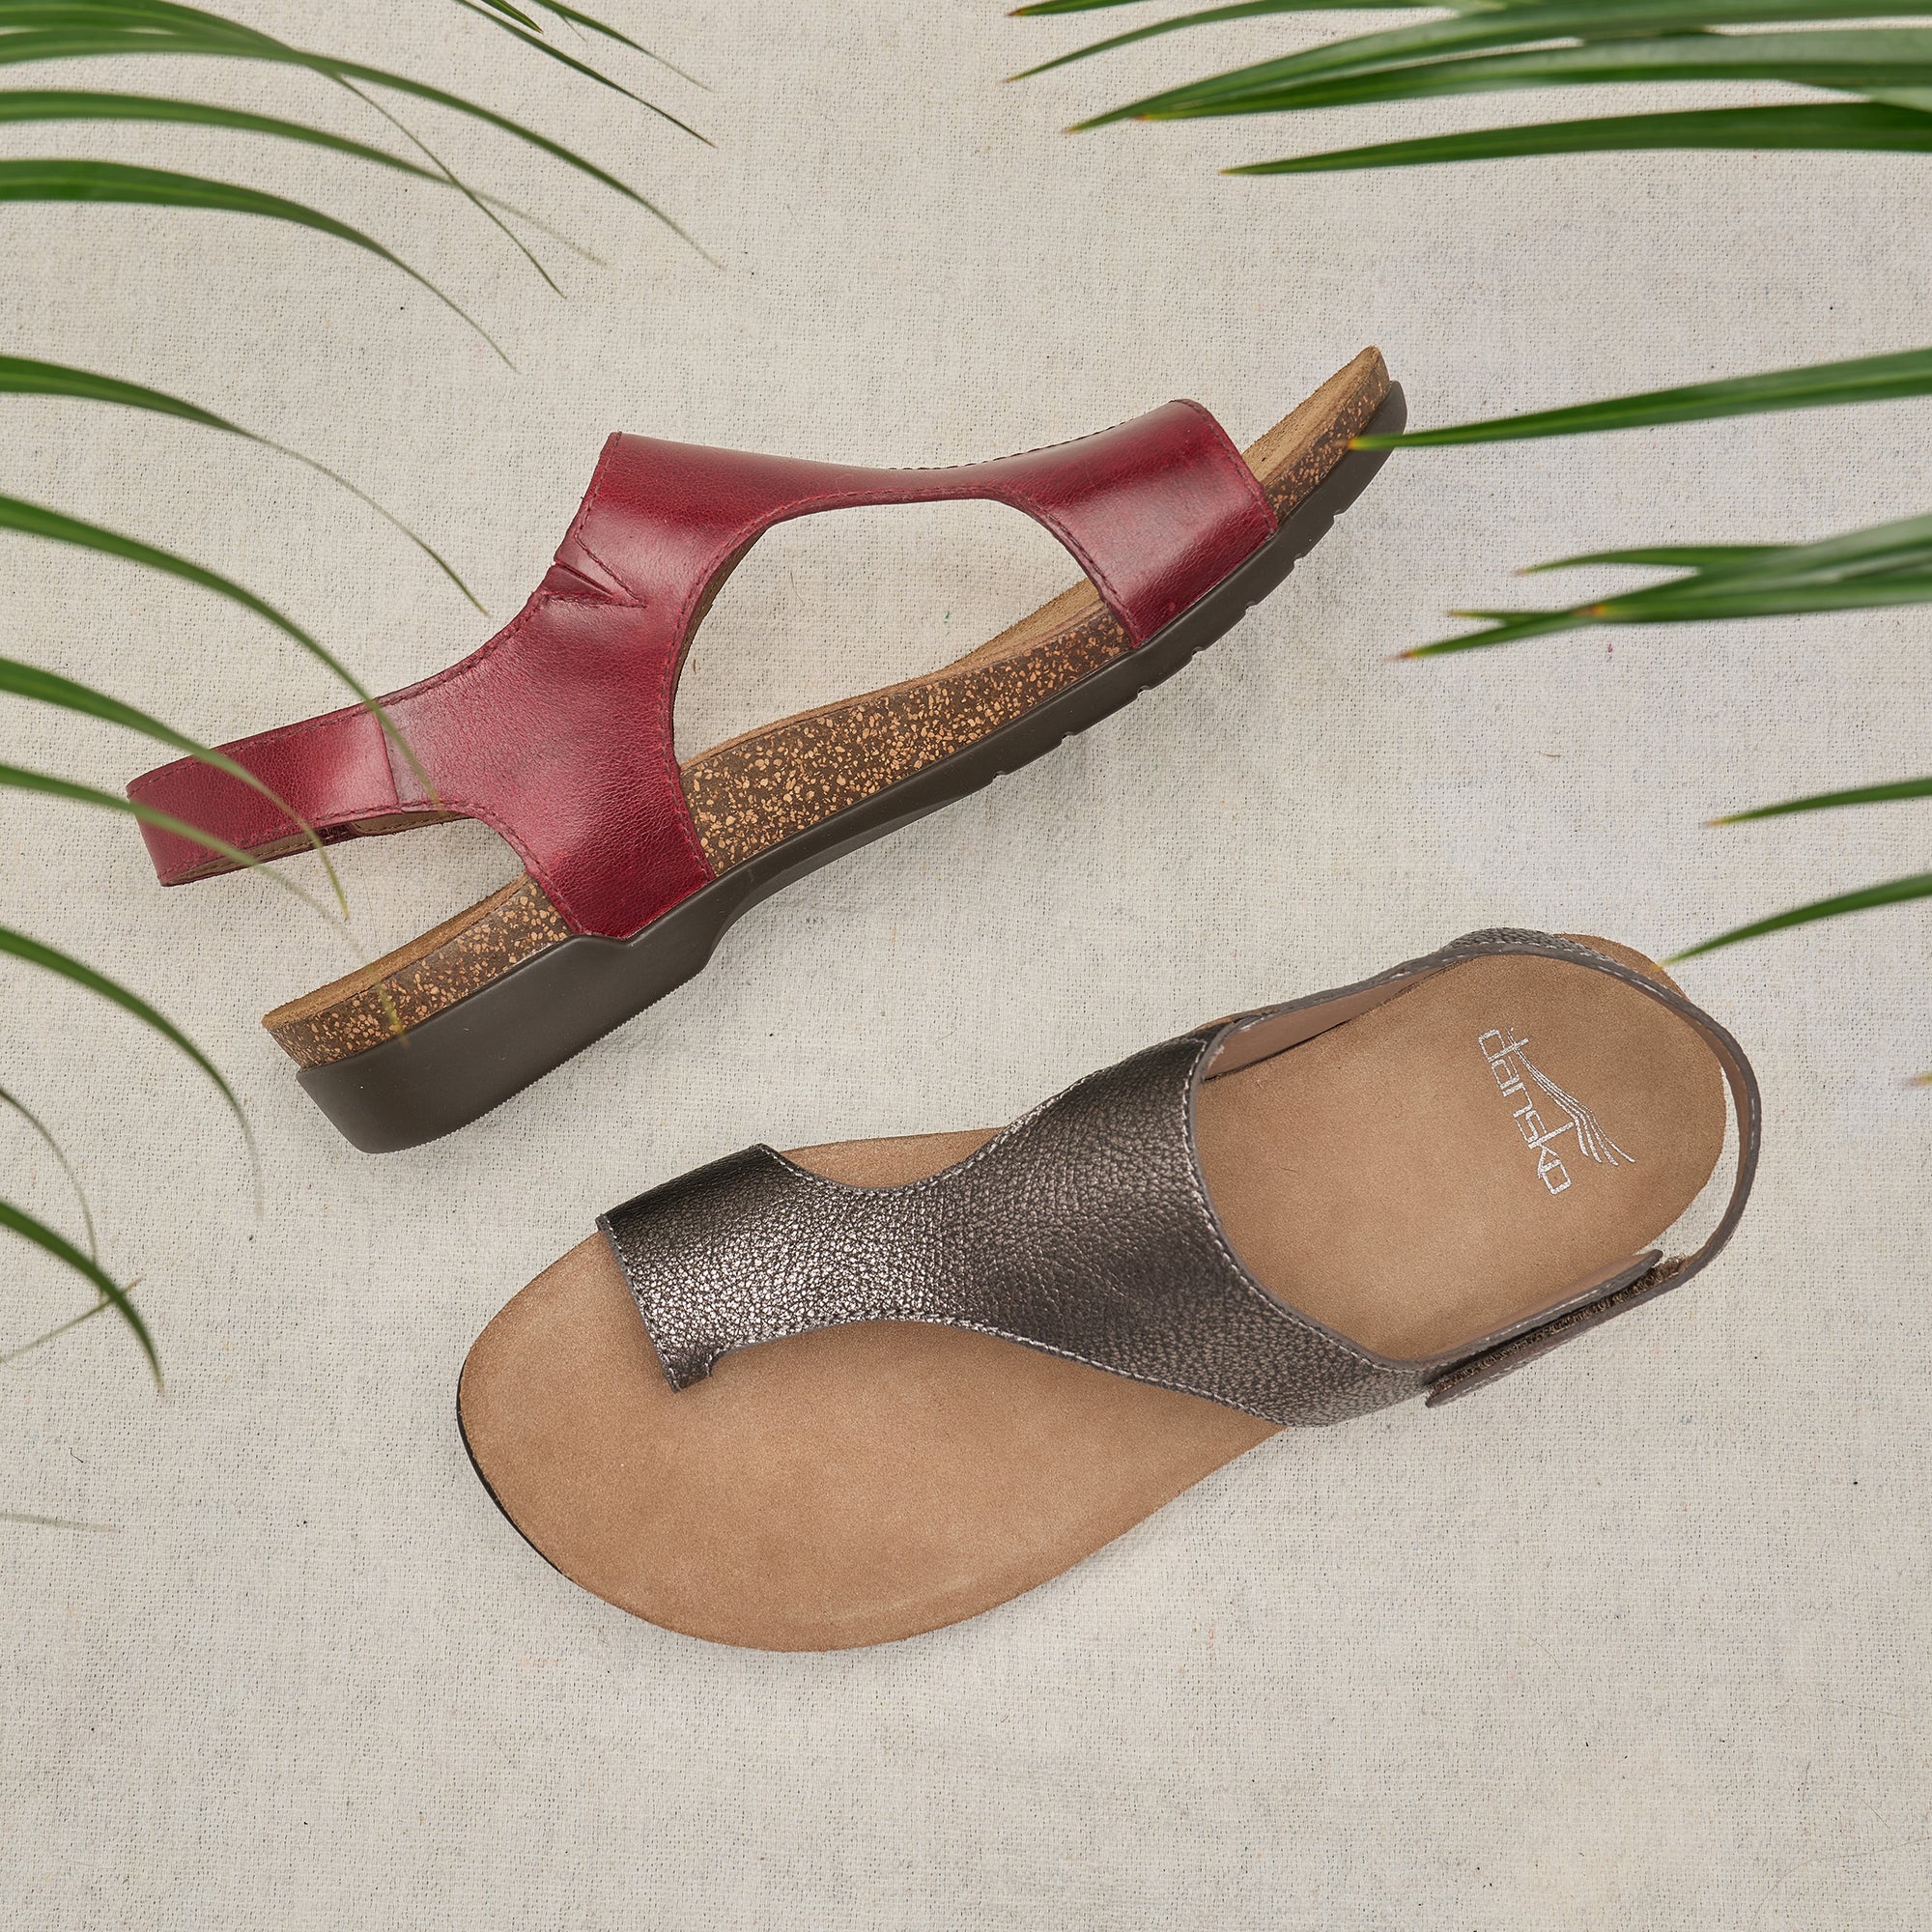 Two new colors of a flat leather sandal, metallic and cinnabar, shown stylishly.